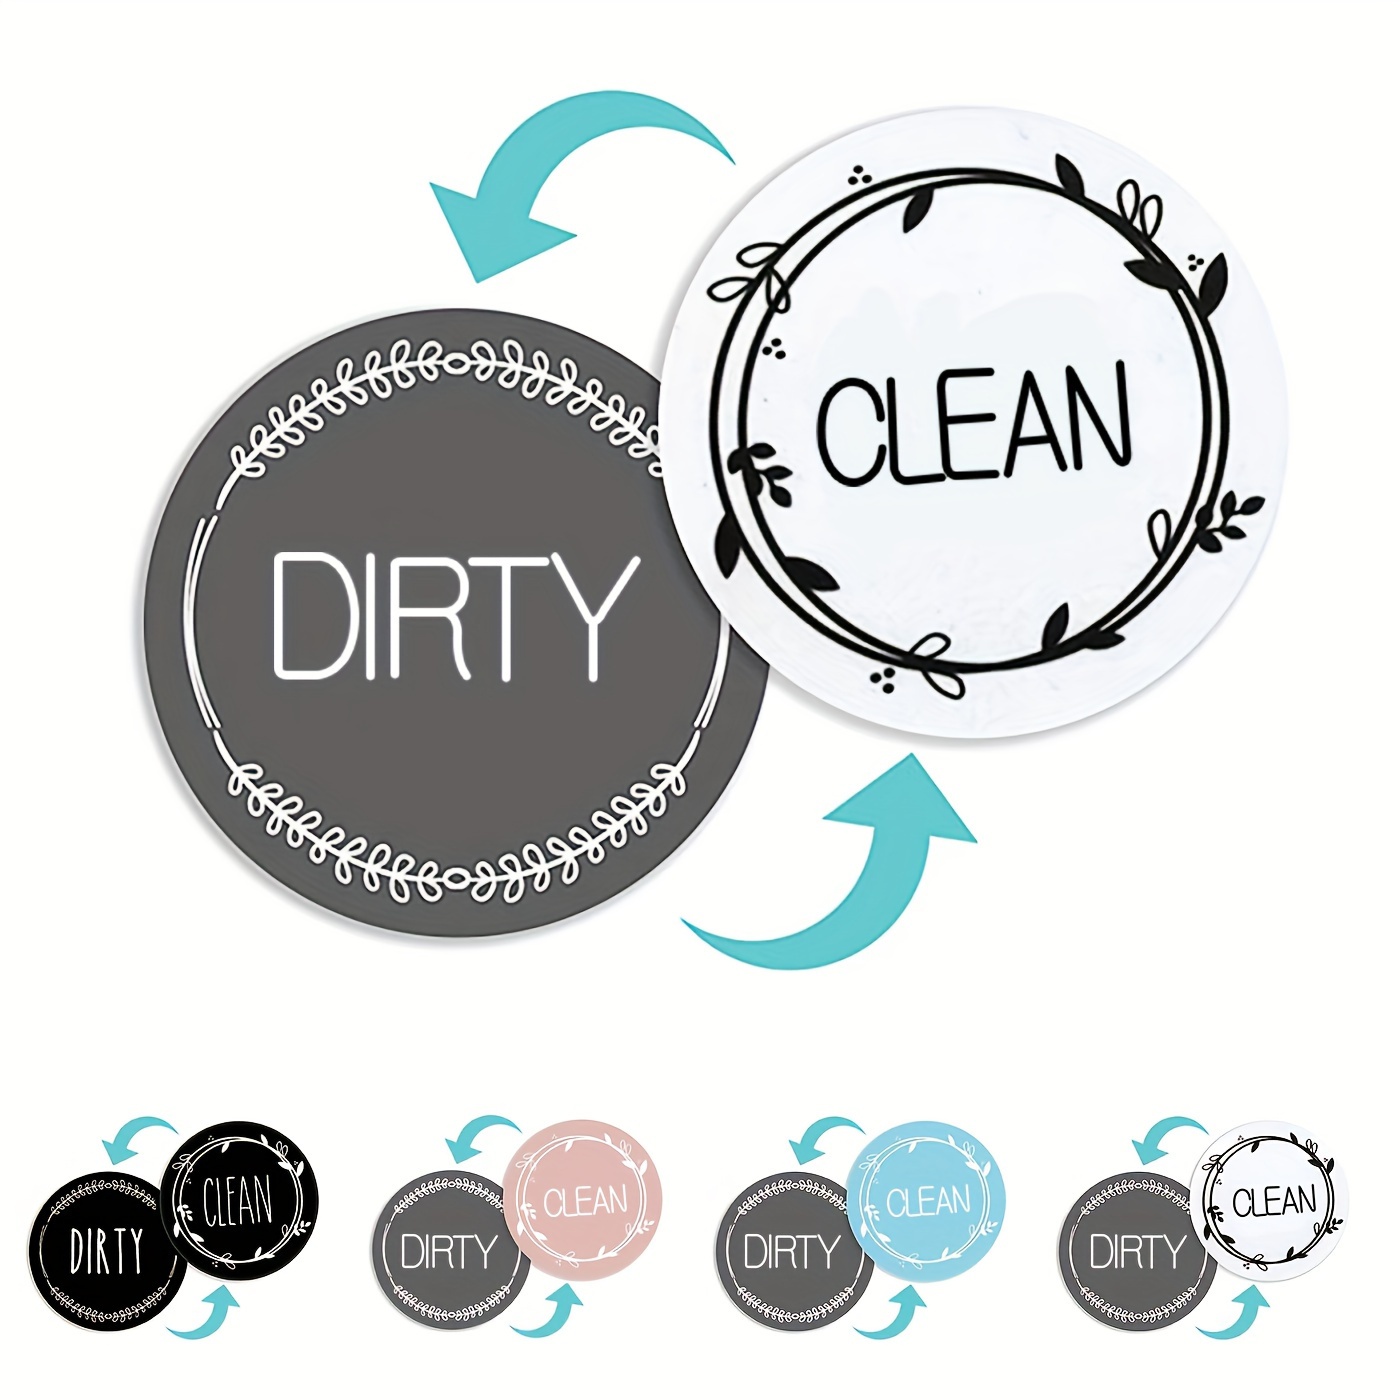 Dishwasher Magnet Clean Dirty Sign, Clean Dirty Magnet for Dishwasher, Dirty Clean Dishwasher Magnet, Dishwasher Clean Dirty Sign, Strong/Non